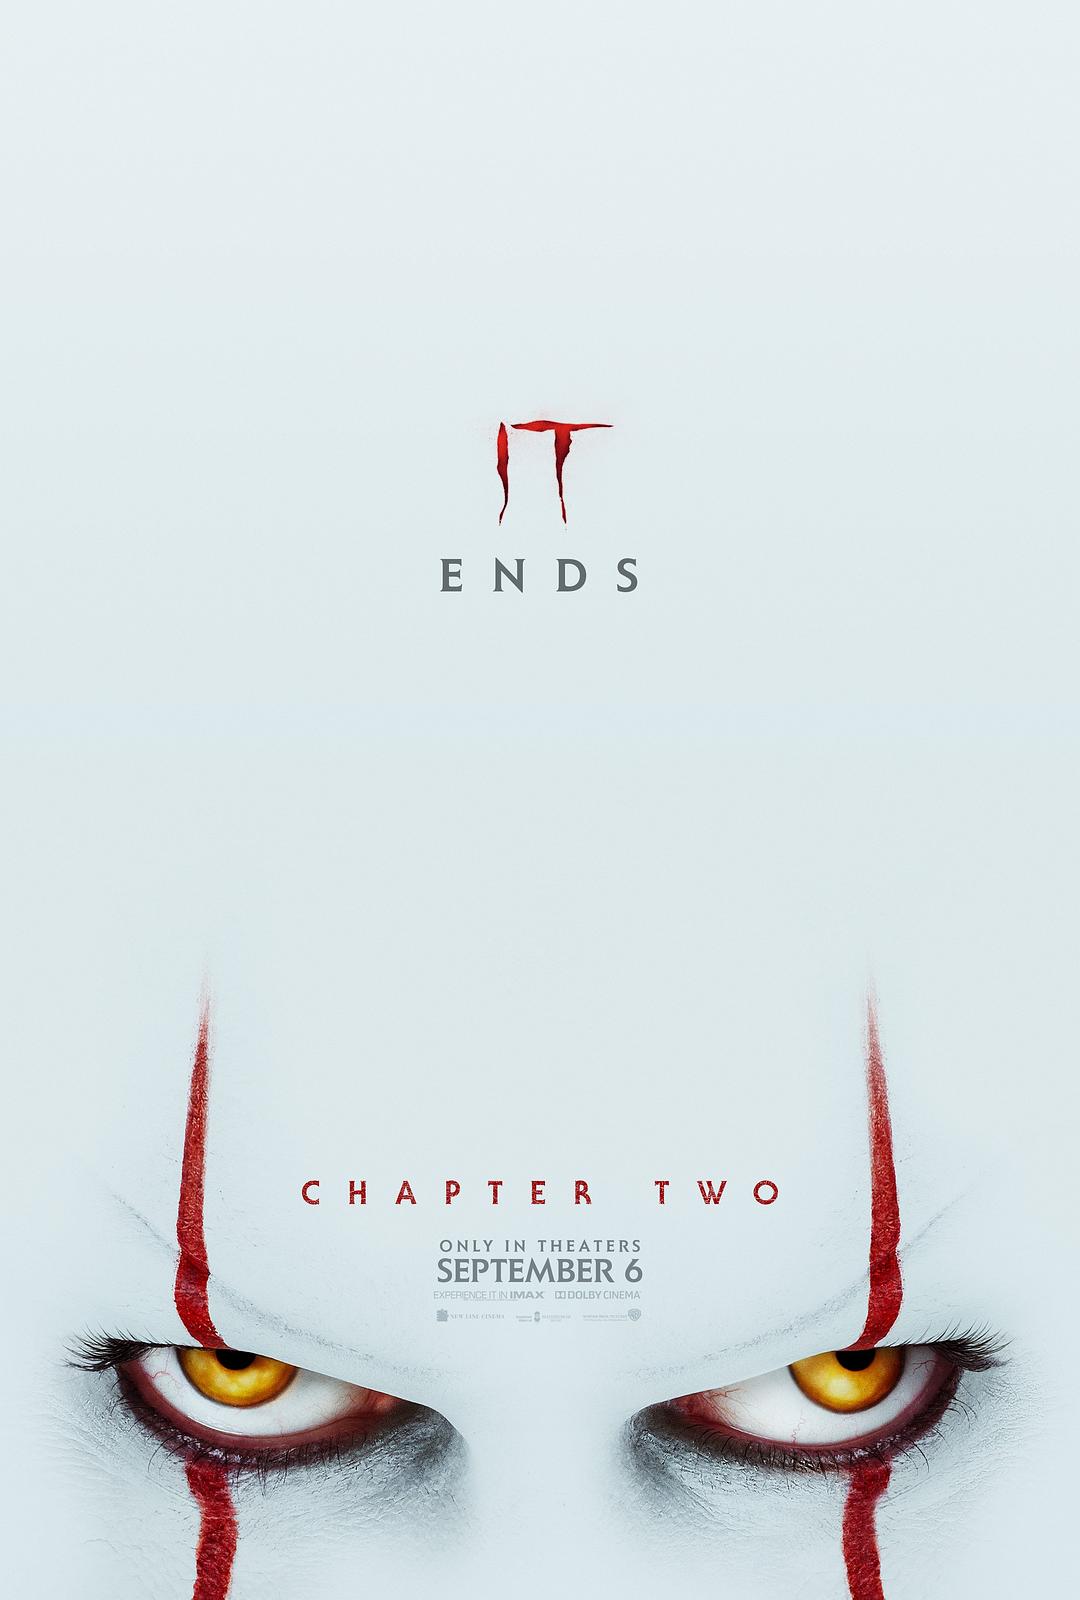 Сػ2 It.Chapter.Two.2019.1080p.BluRay.x264-DRONES 12.04GB-1.png